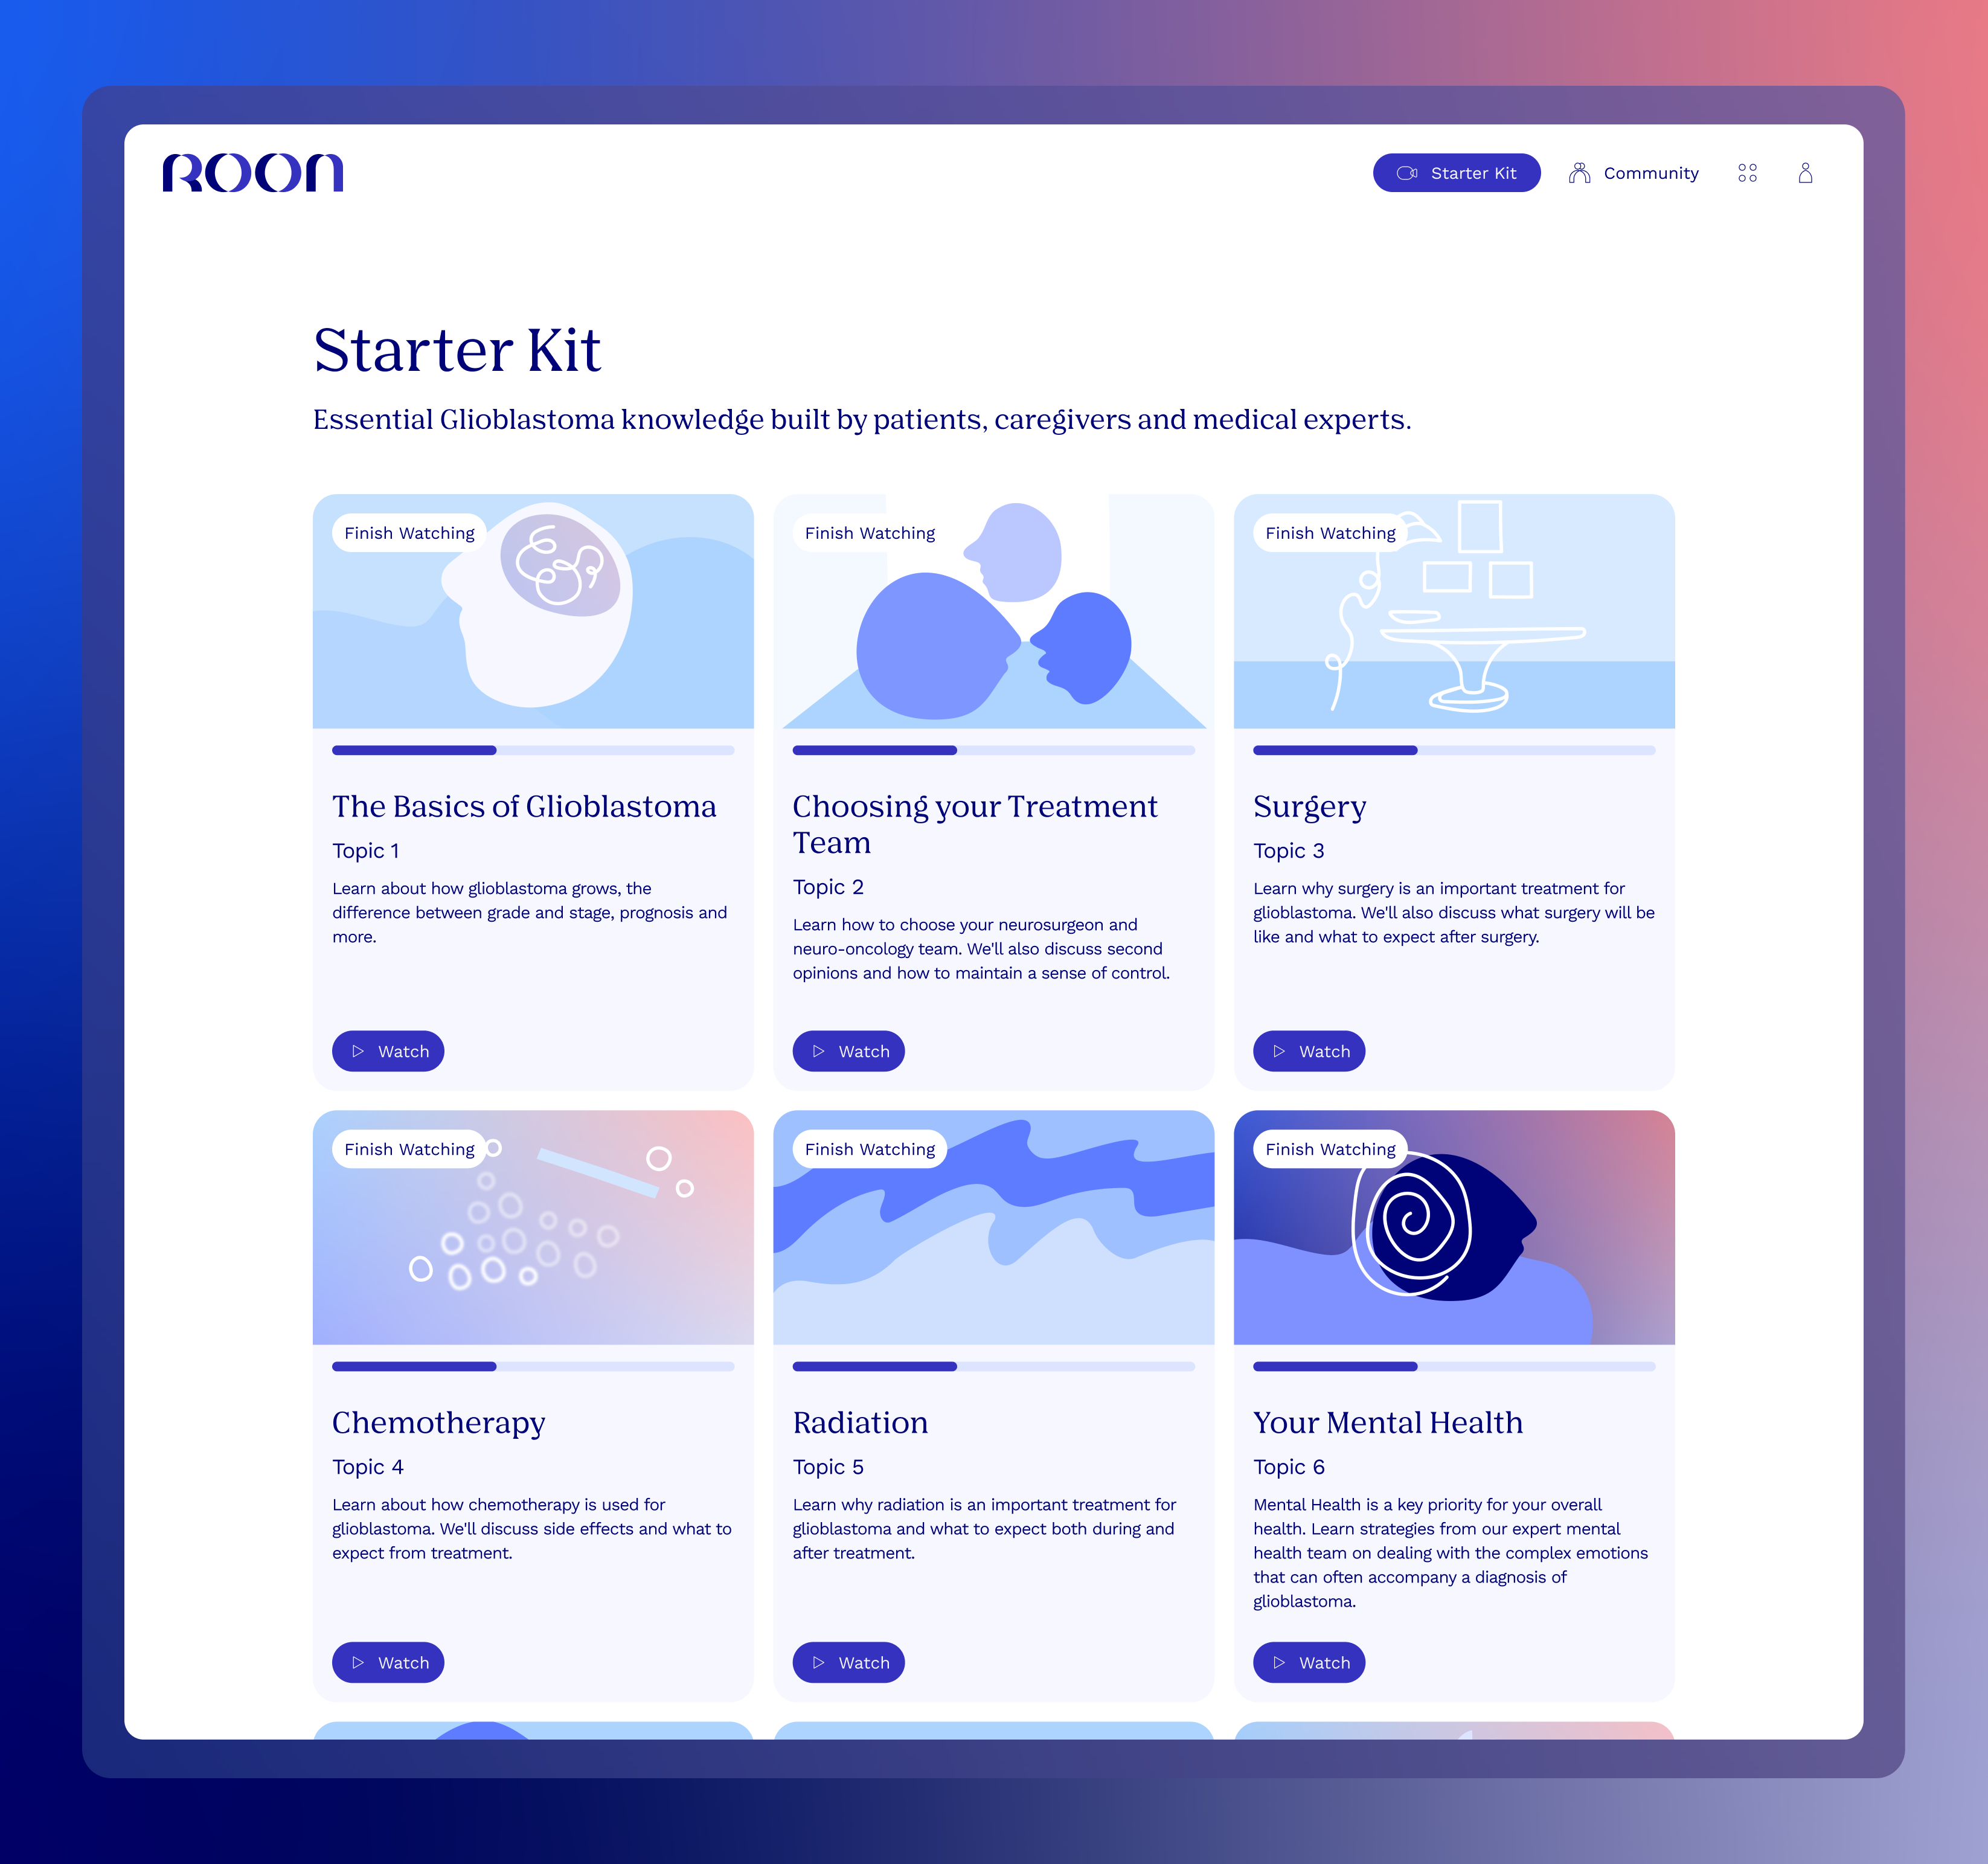 Roon wants to educate patients with freshly sourced info on their conditions